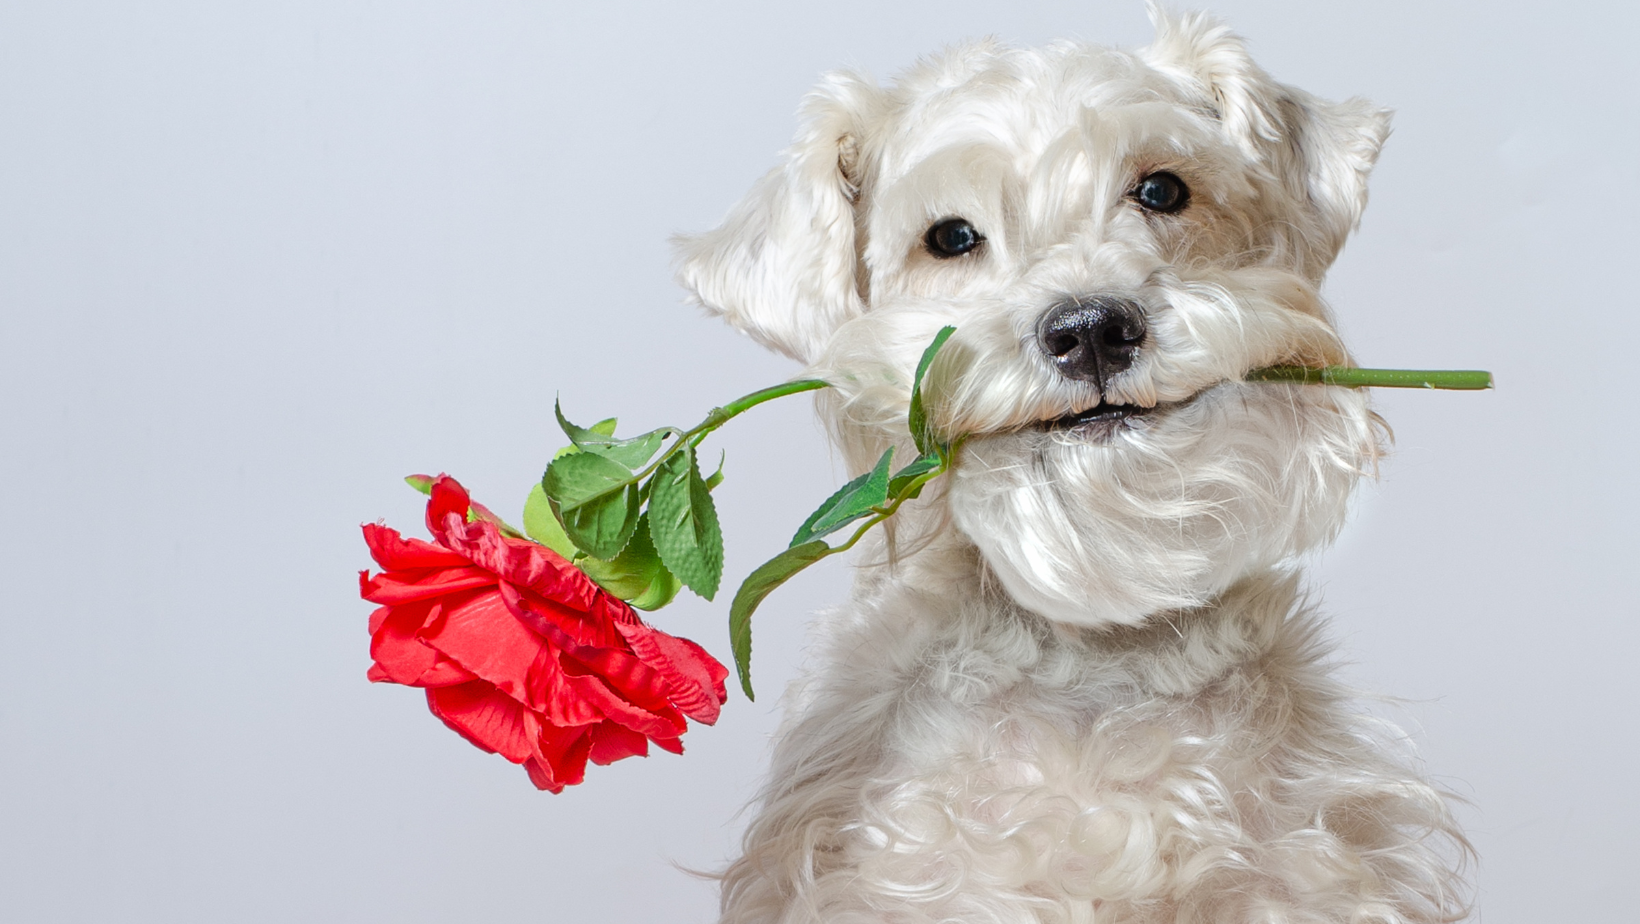 Broward County Animal Care Holds 'Stinky Ex' Fundraiser for Valentine's Day 1